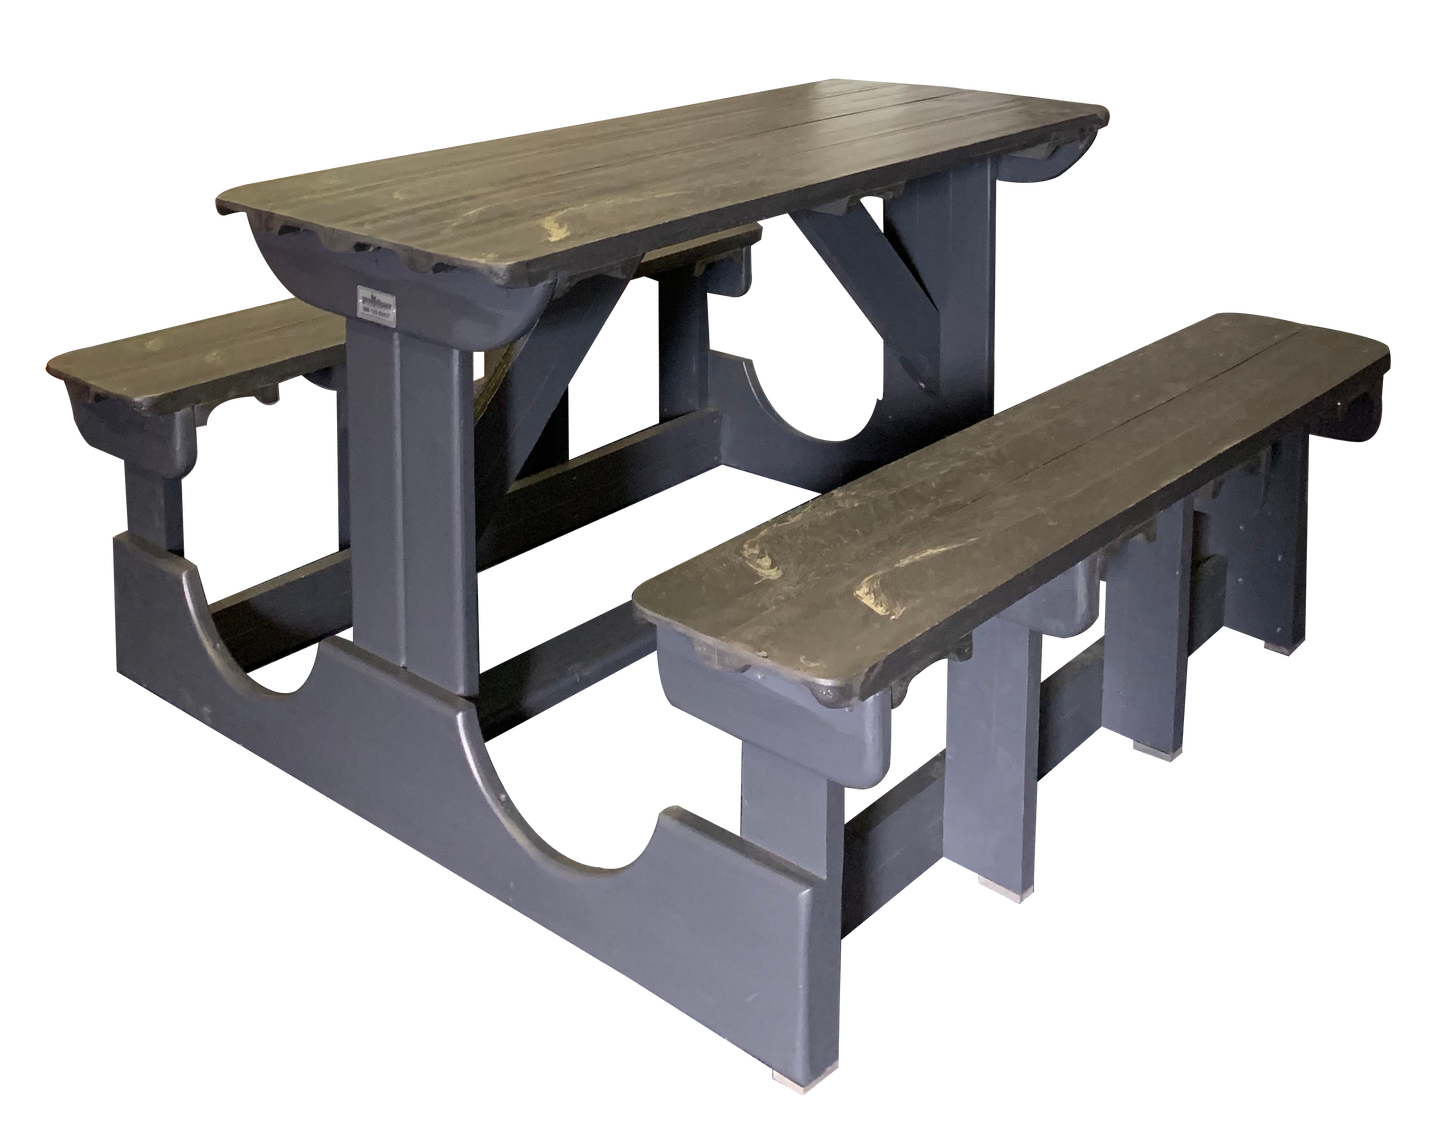 THE "STEENBERG" POLY / PINE BENCH   (50% Recycled Plastic & 50% Timber)